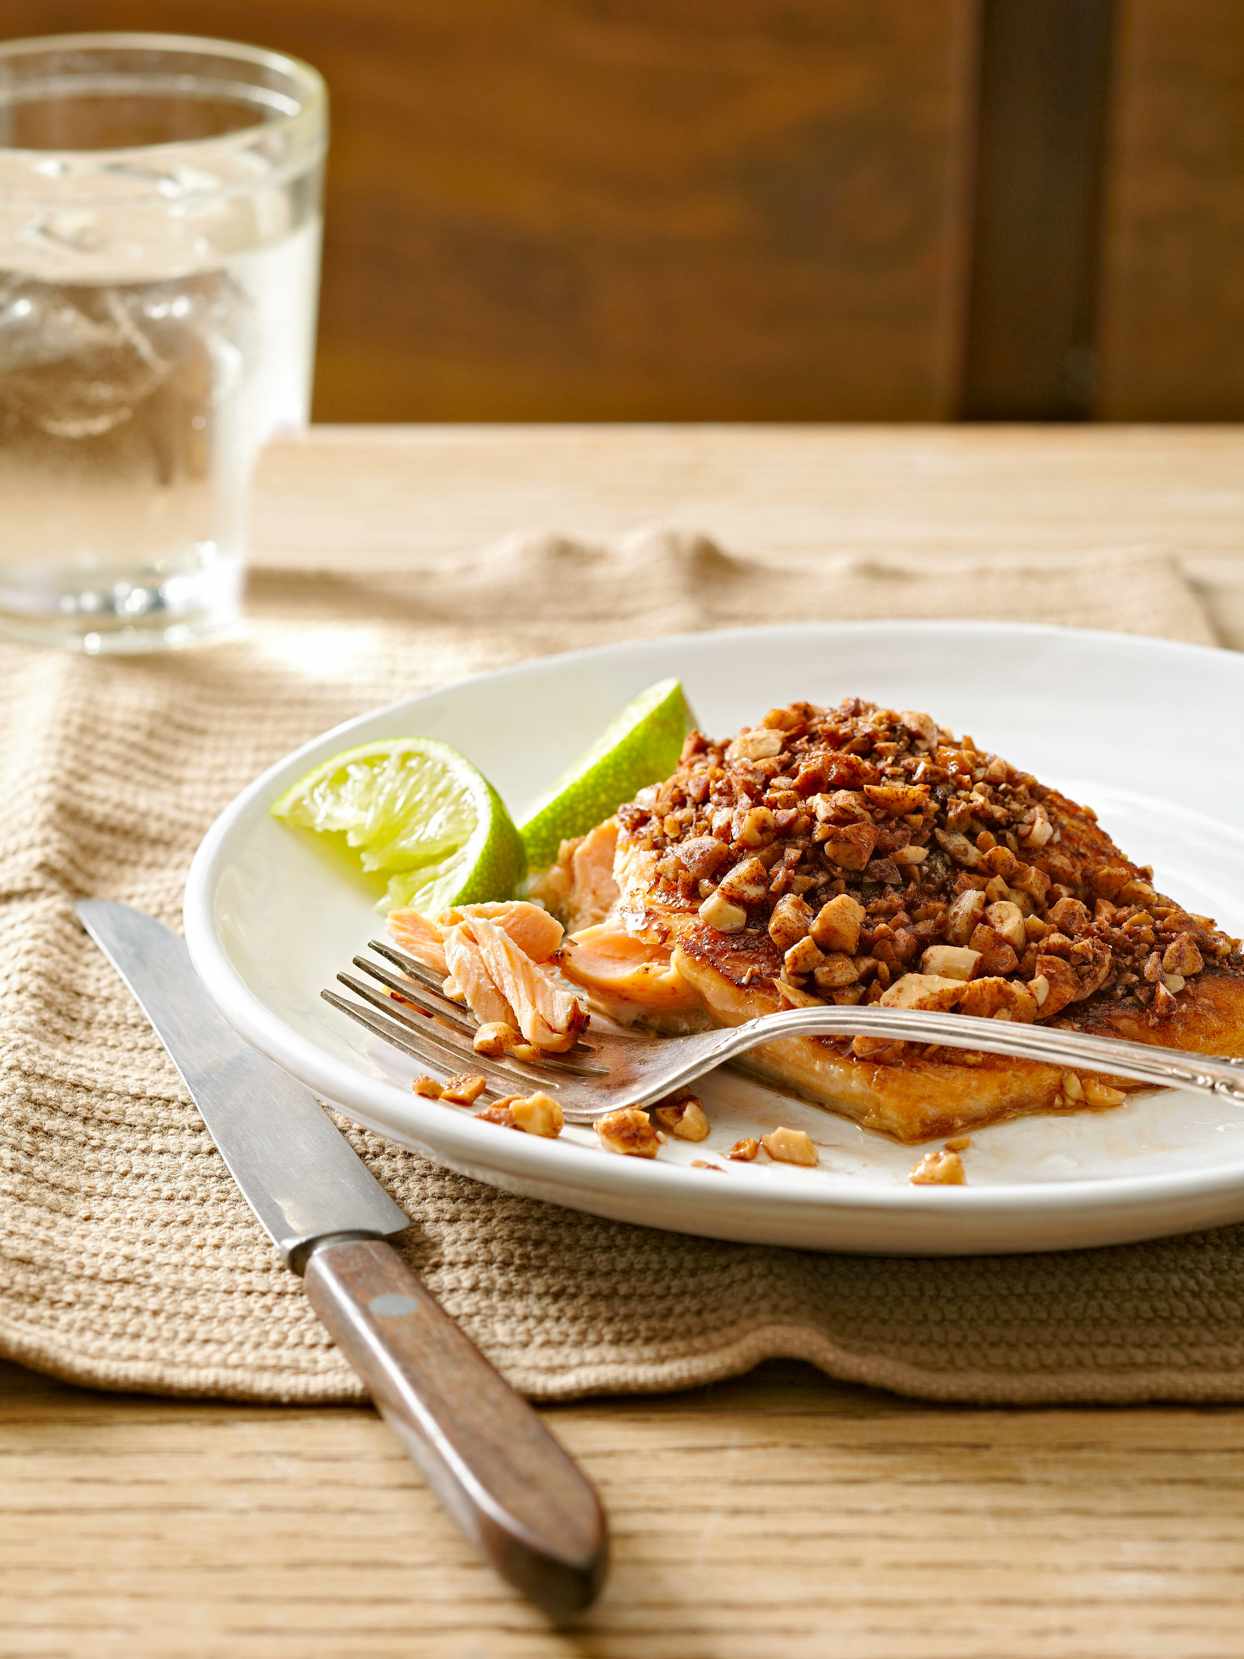 Lunch: Cocoa Almond-Crusted Salmon